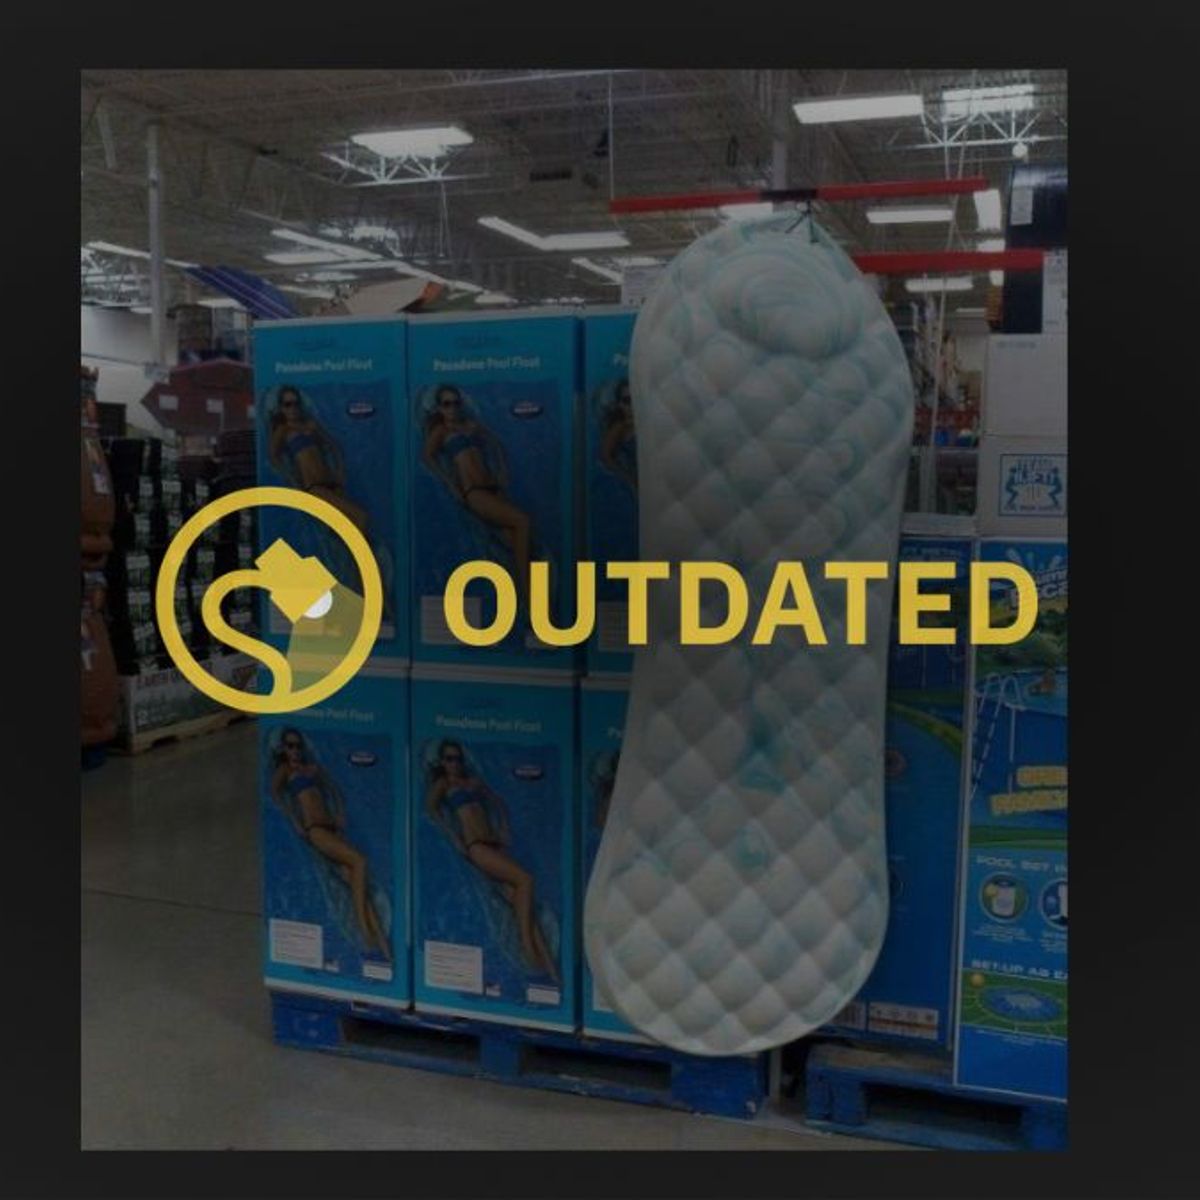 Was a 'Giant Maxi Pad' Pool Float a Real Product?